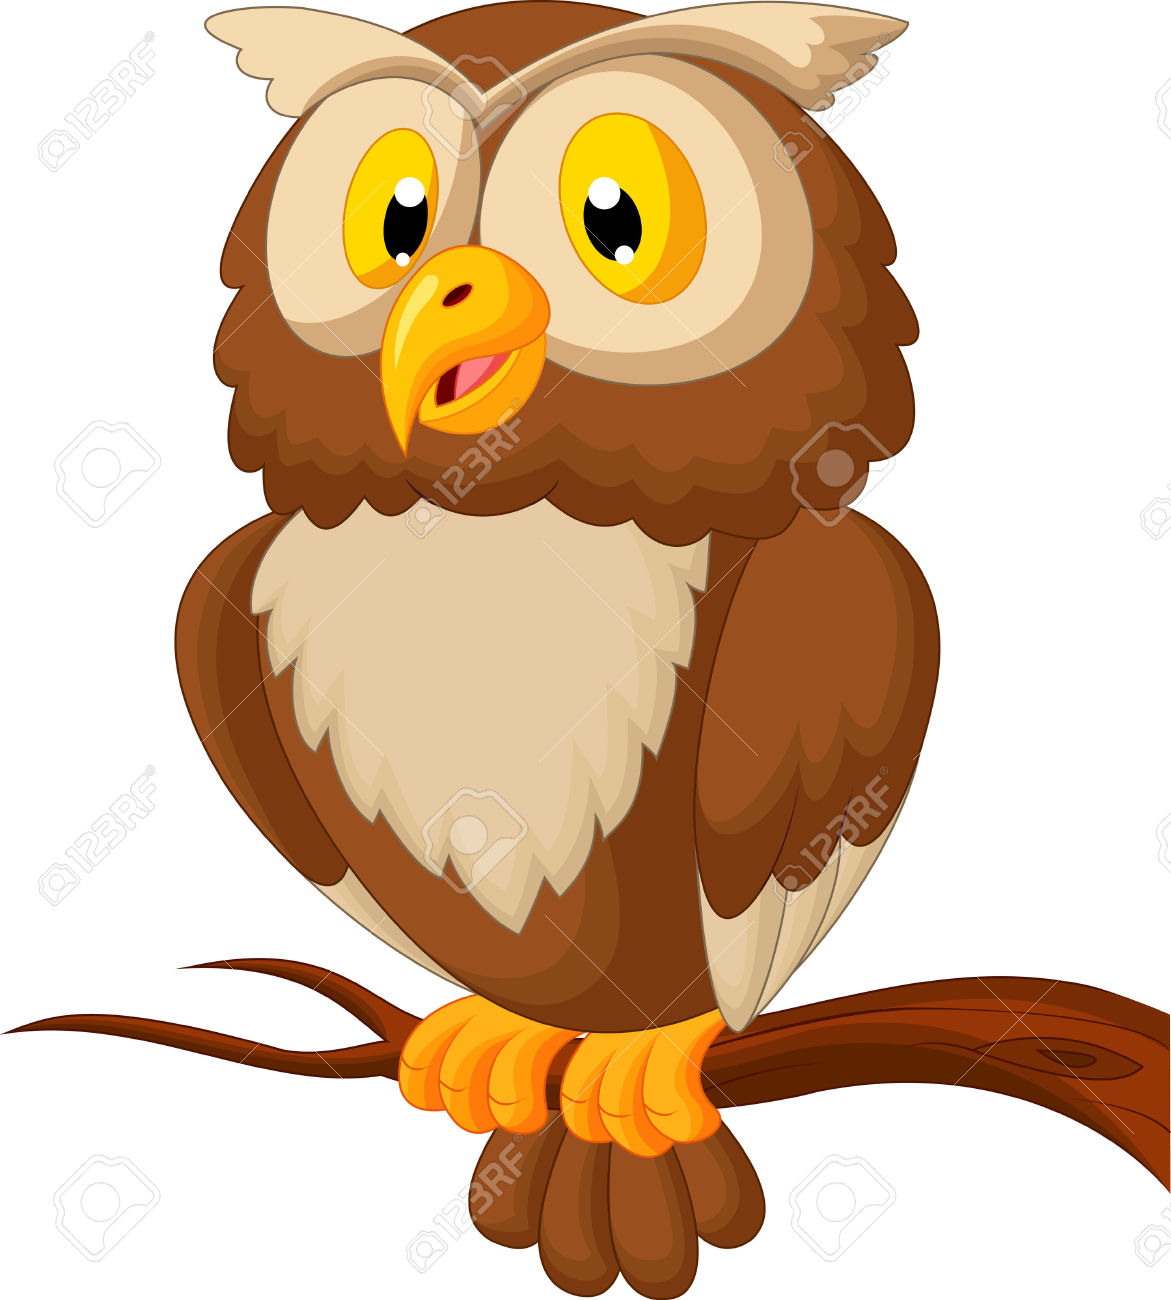 Hoot clipart, Download Hoot clipart for free 2019